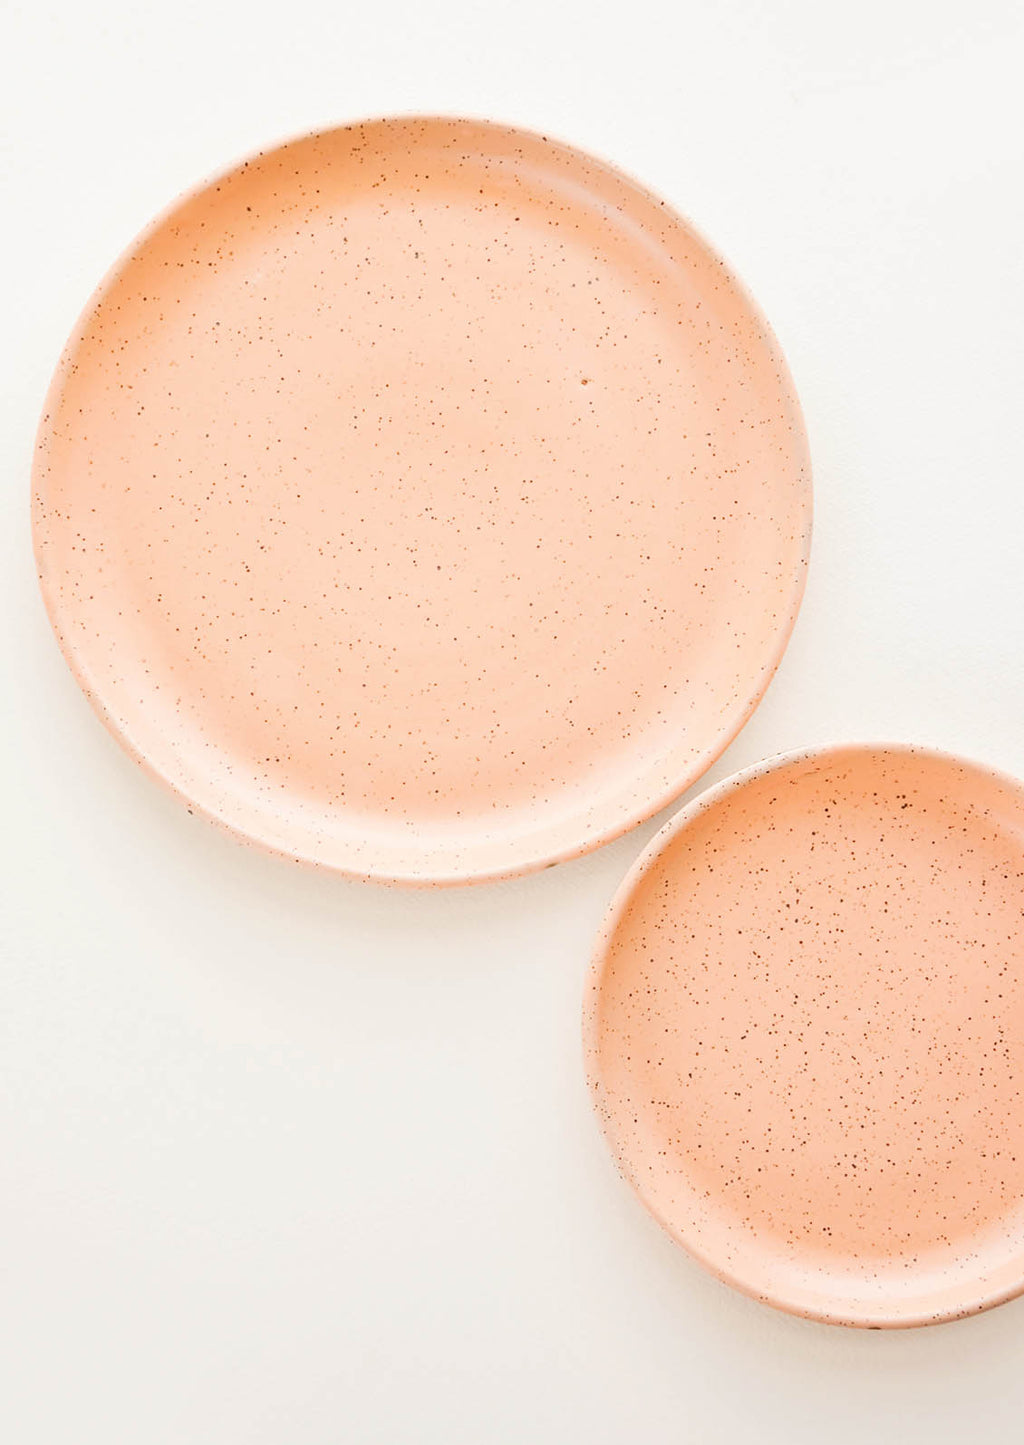 Apricot / Salad Plate: A pair of apricot Colored Speckled Ceramic Salad & Dinner Plates.